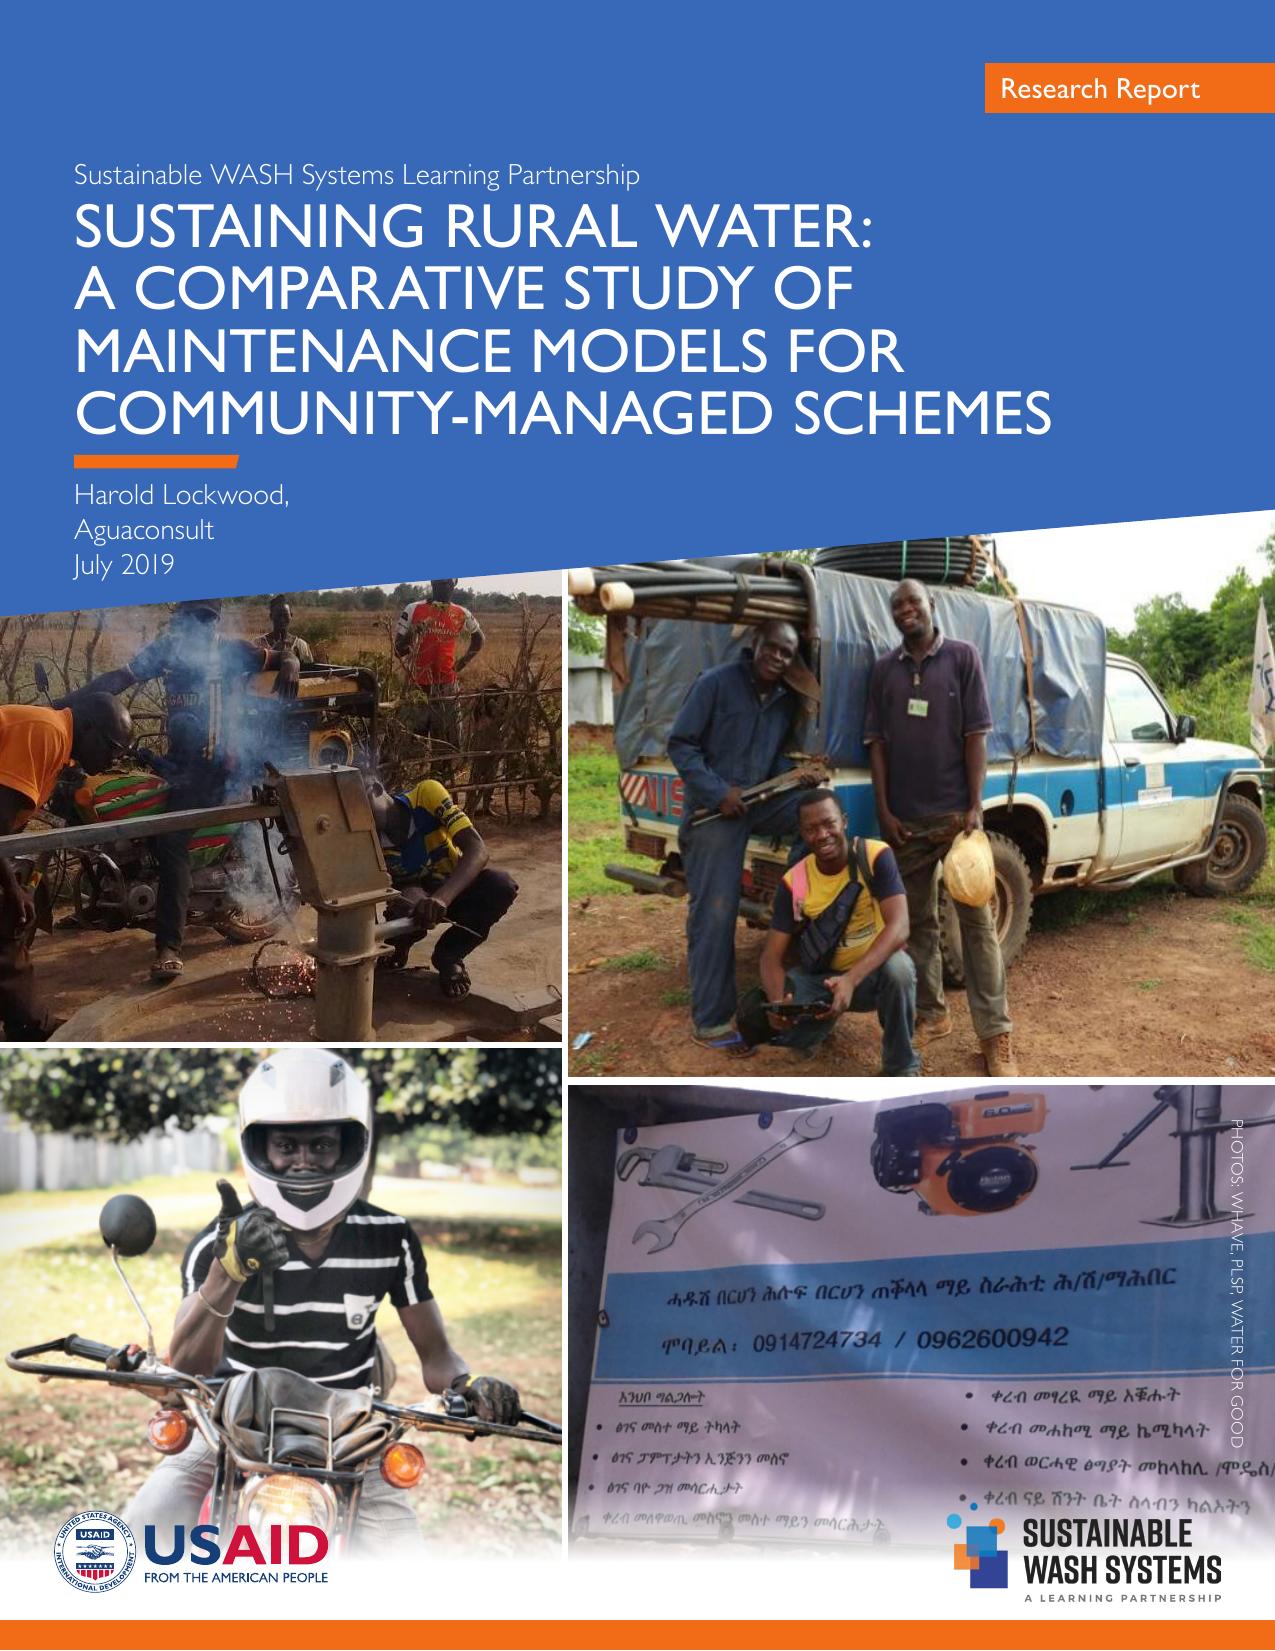 Sustaining Rural Water- A Comparative Study of Maintenance Models for Community-Managed Schemes